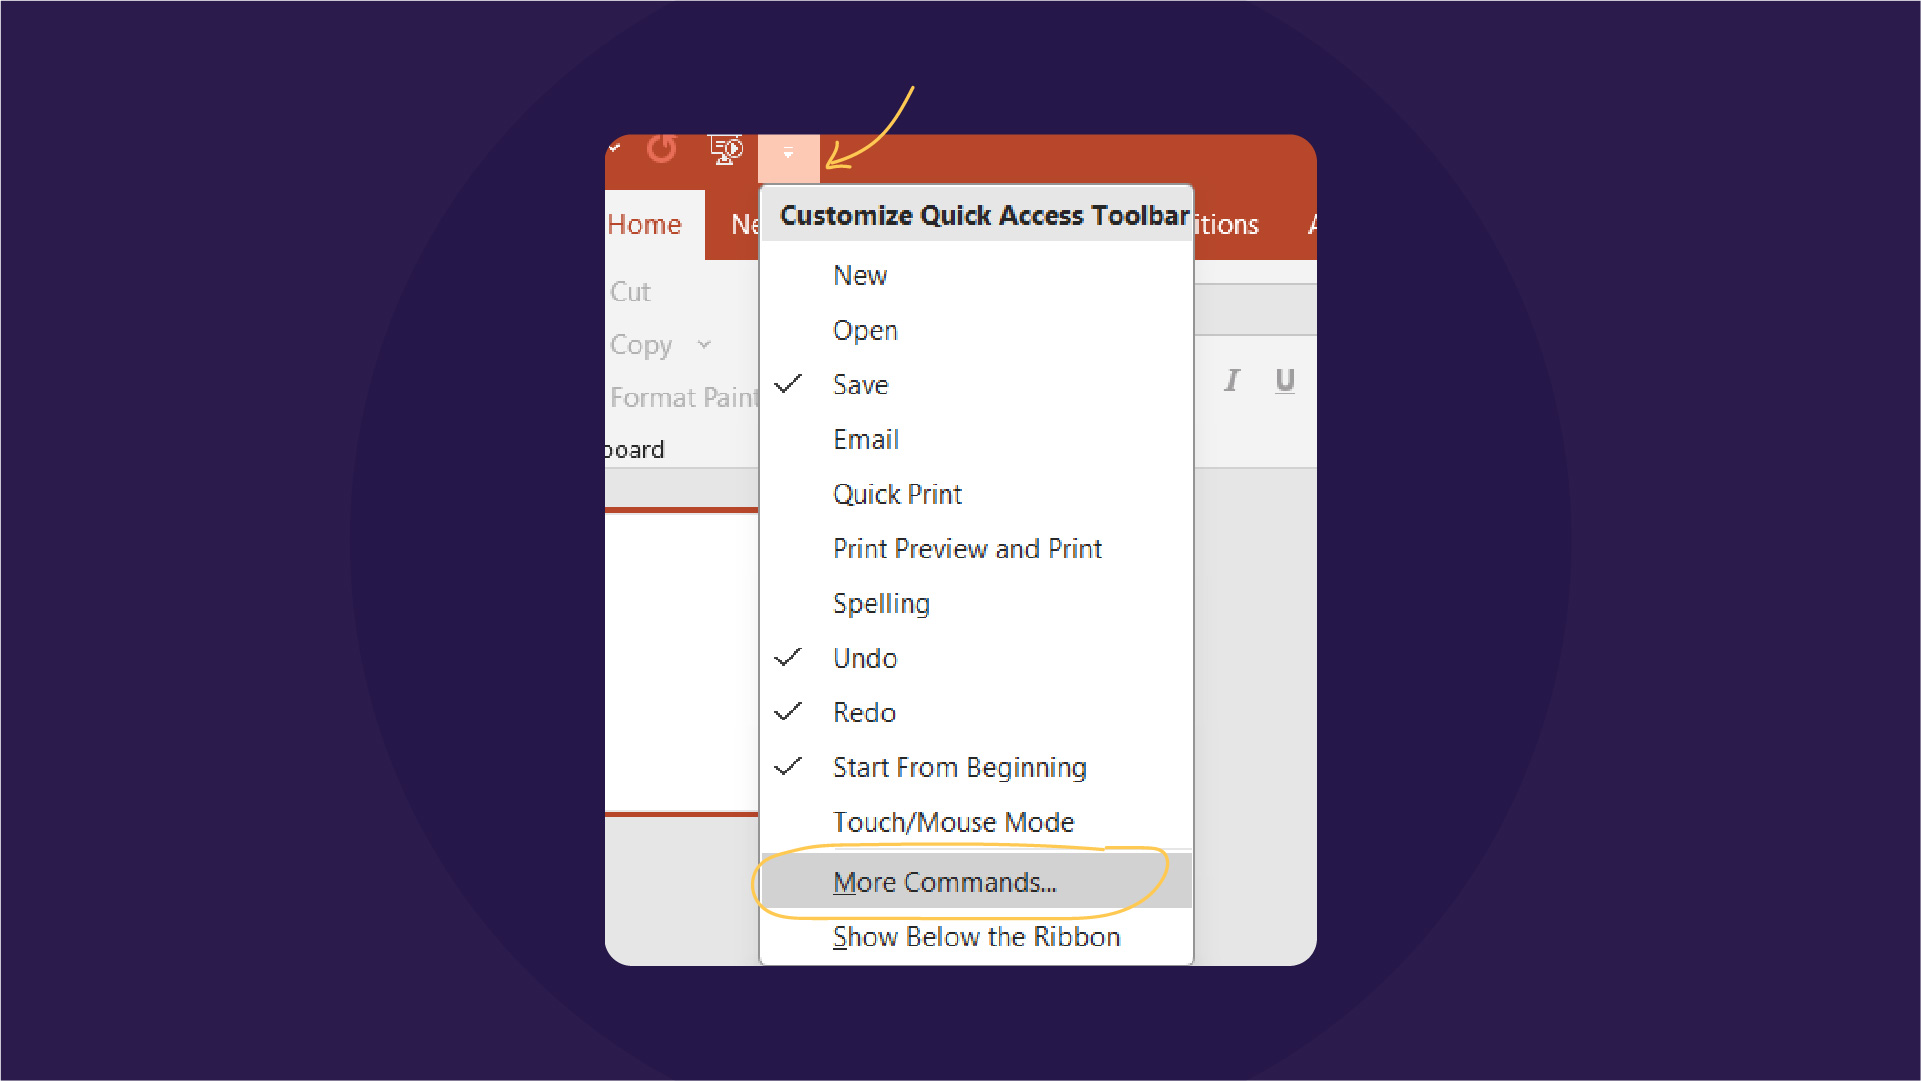 Customizing the Quick Access Toolbar in PPT